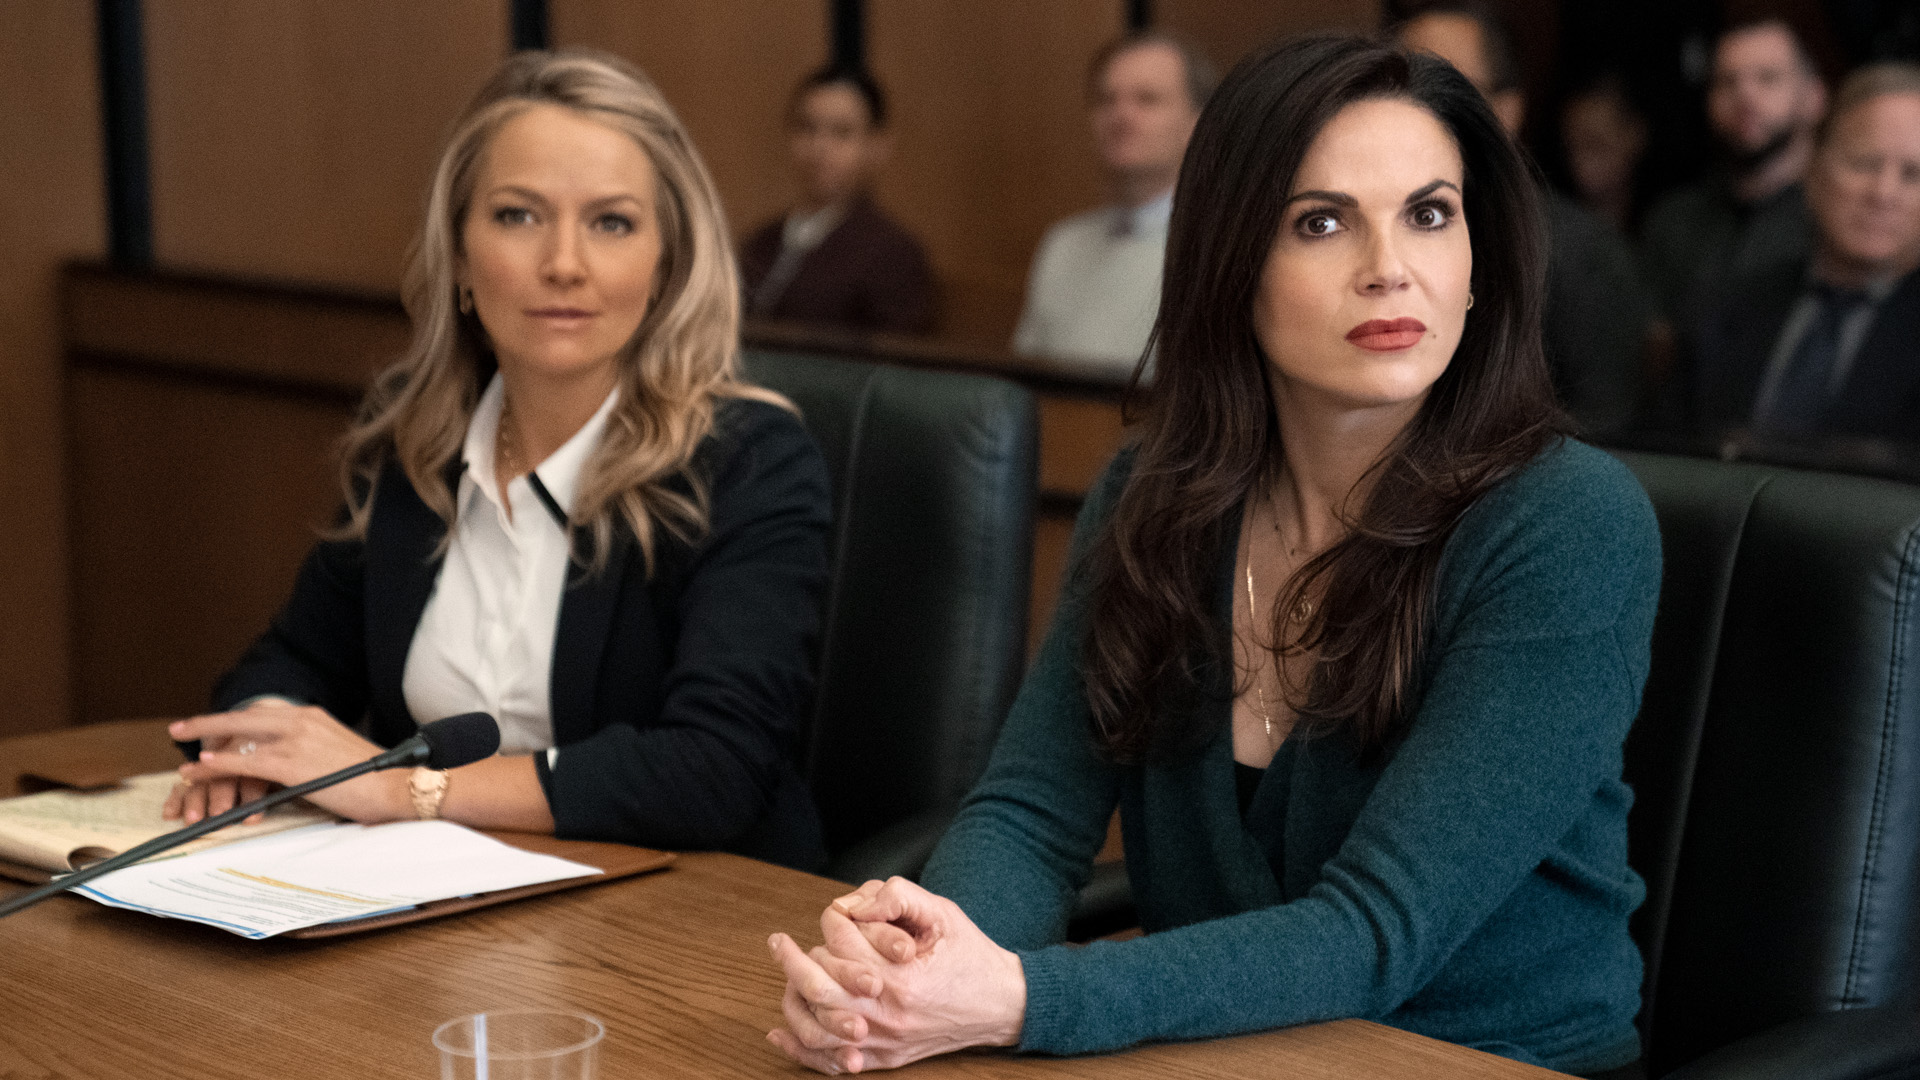 Lorna and Lisa sit in a courtroom as they look at someone off-camera in The Lincoln Lawyer season 2